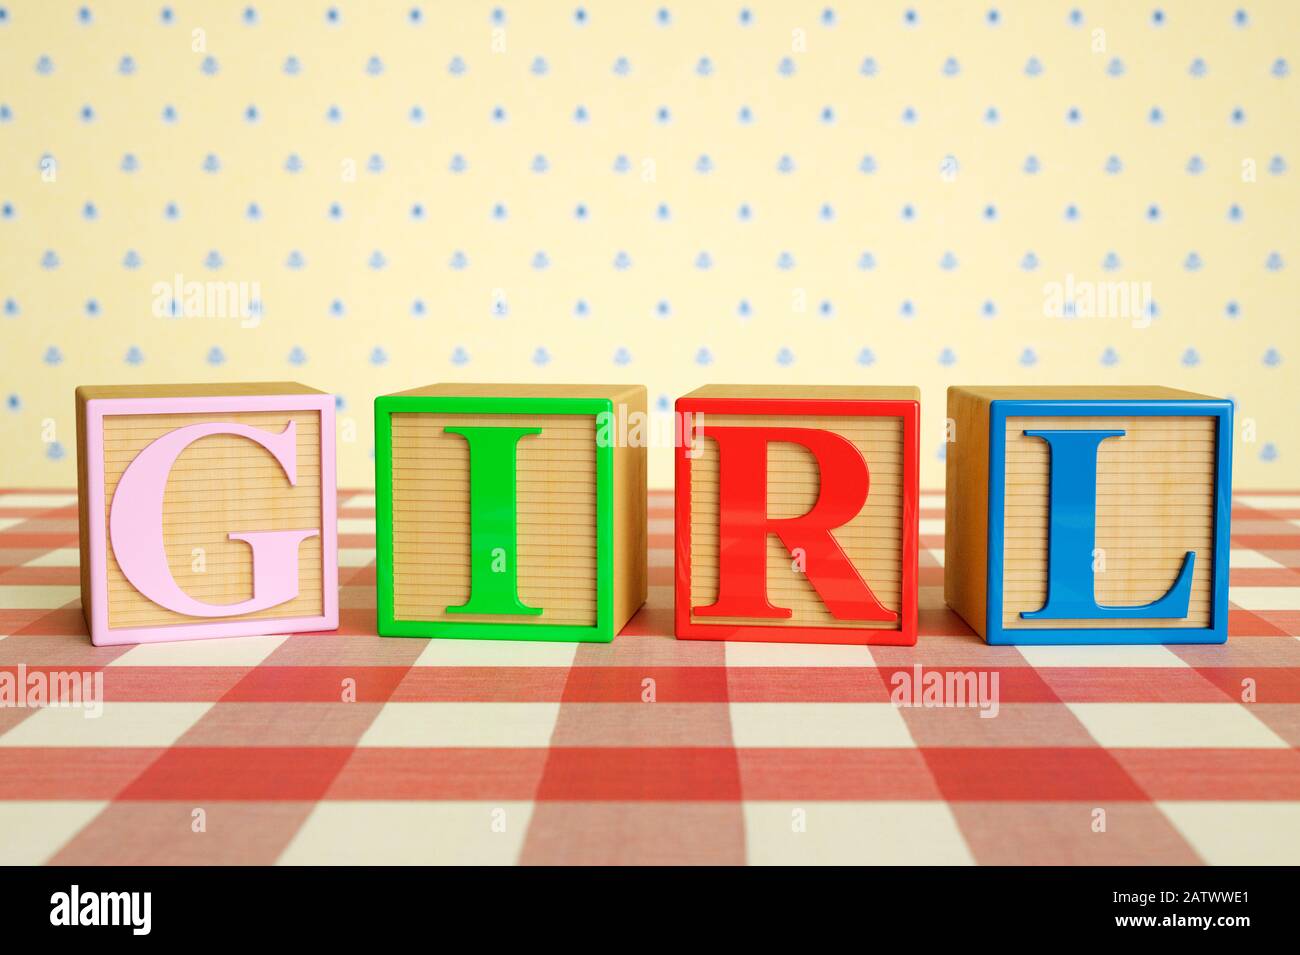 Childrens wooden ABC blocks spelling GIRL on a checked tablecloth Stock Photo